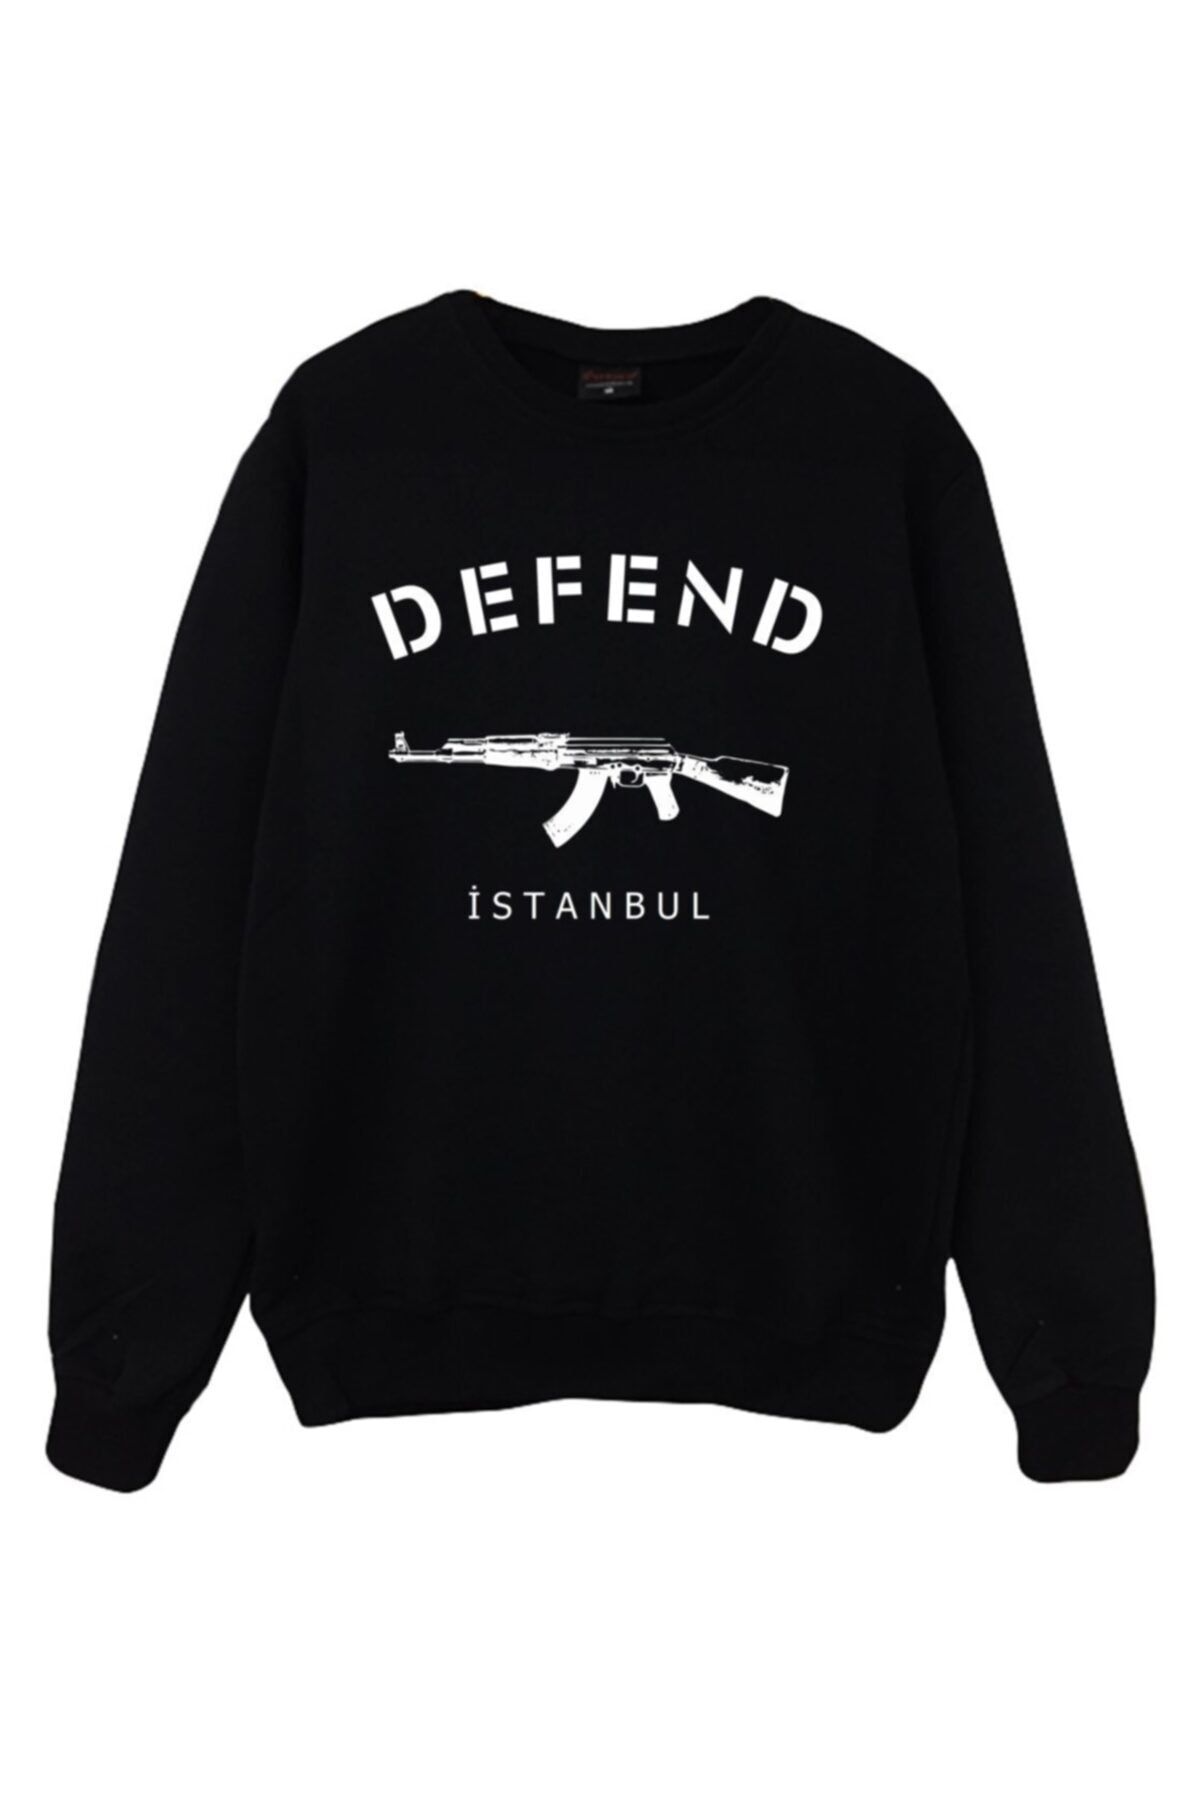 fame-stoned Defend Istanbul